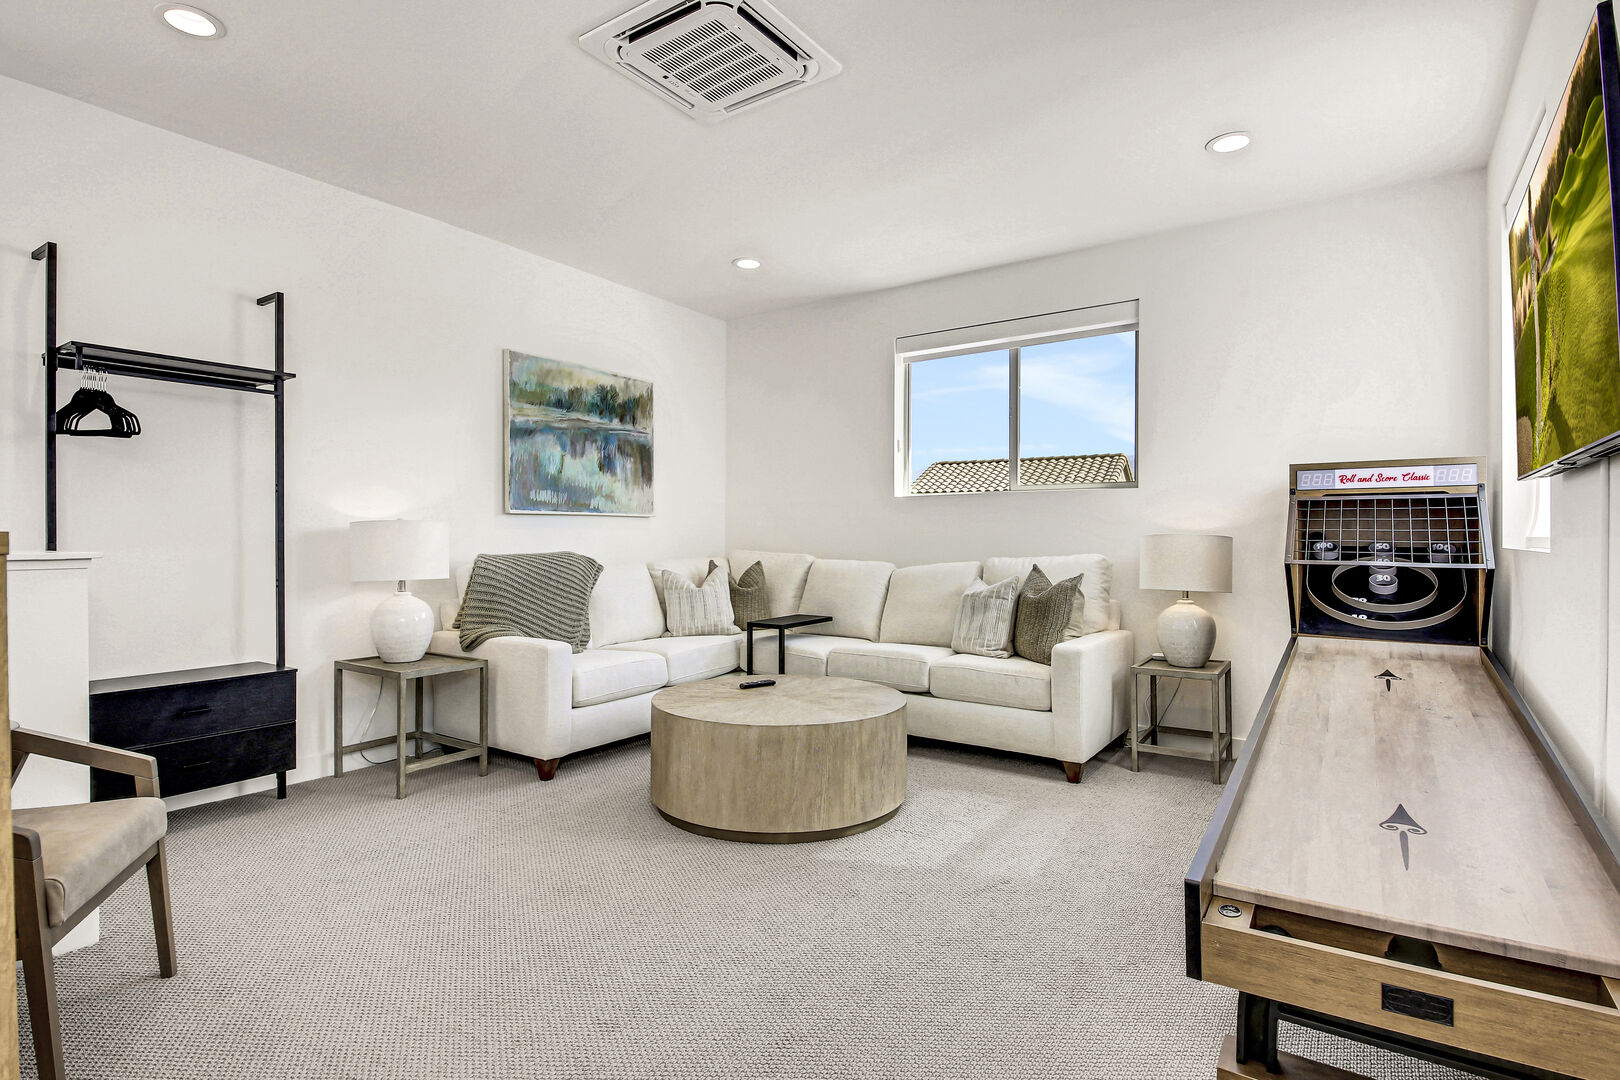 The upstairs landing area features a Queen-sized Sofa Sleeper, 55-inch Samsung Smart television, freestanding garment rack with drawers, couch with seating for six, ceiling-mounted Mini-Split, and a skee-ball machine.